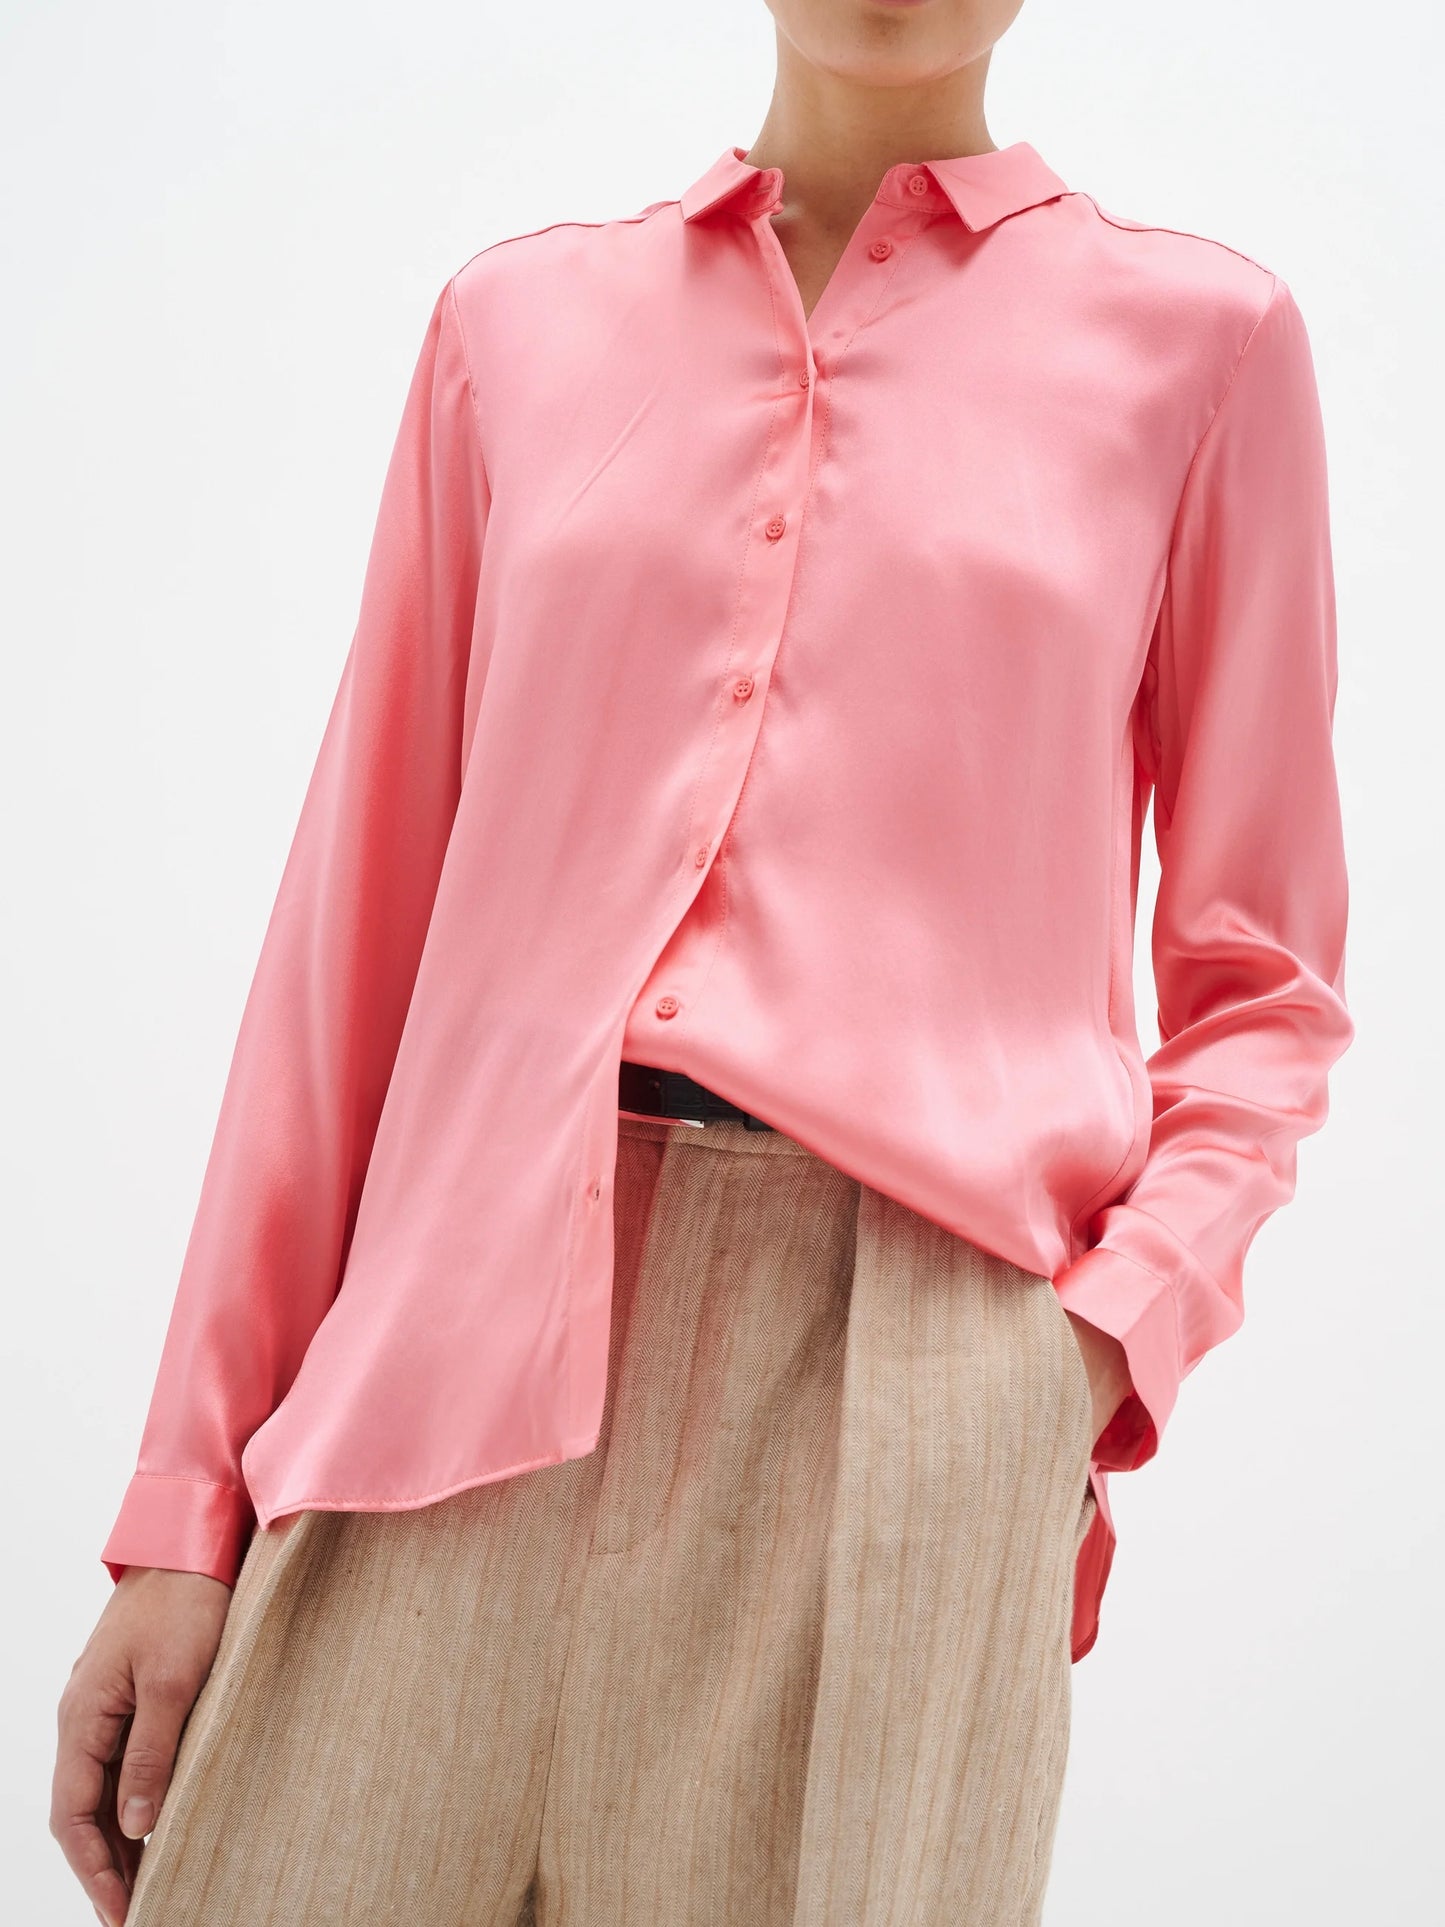 Seidenbluse Leonore IW pink rose